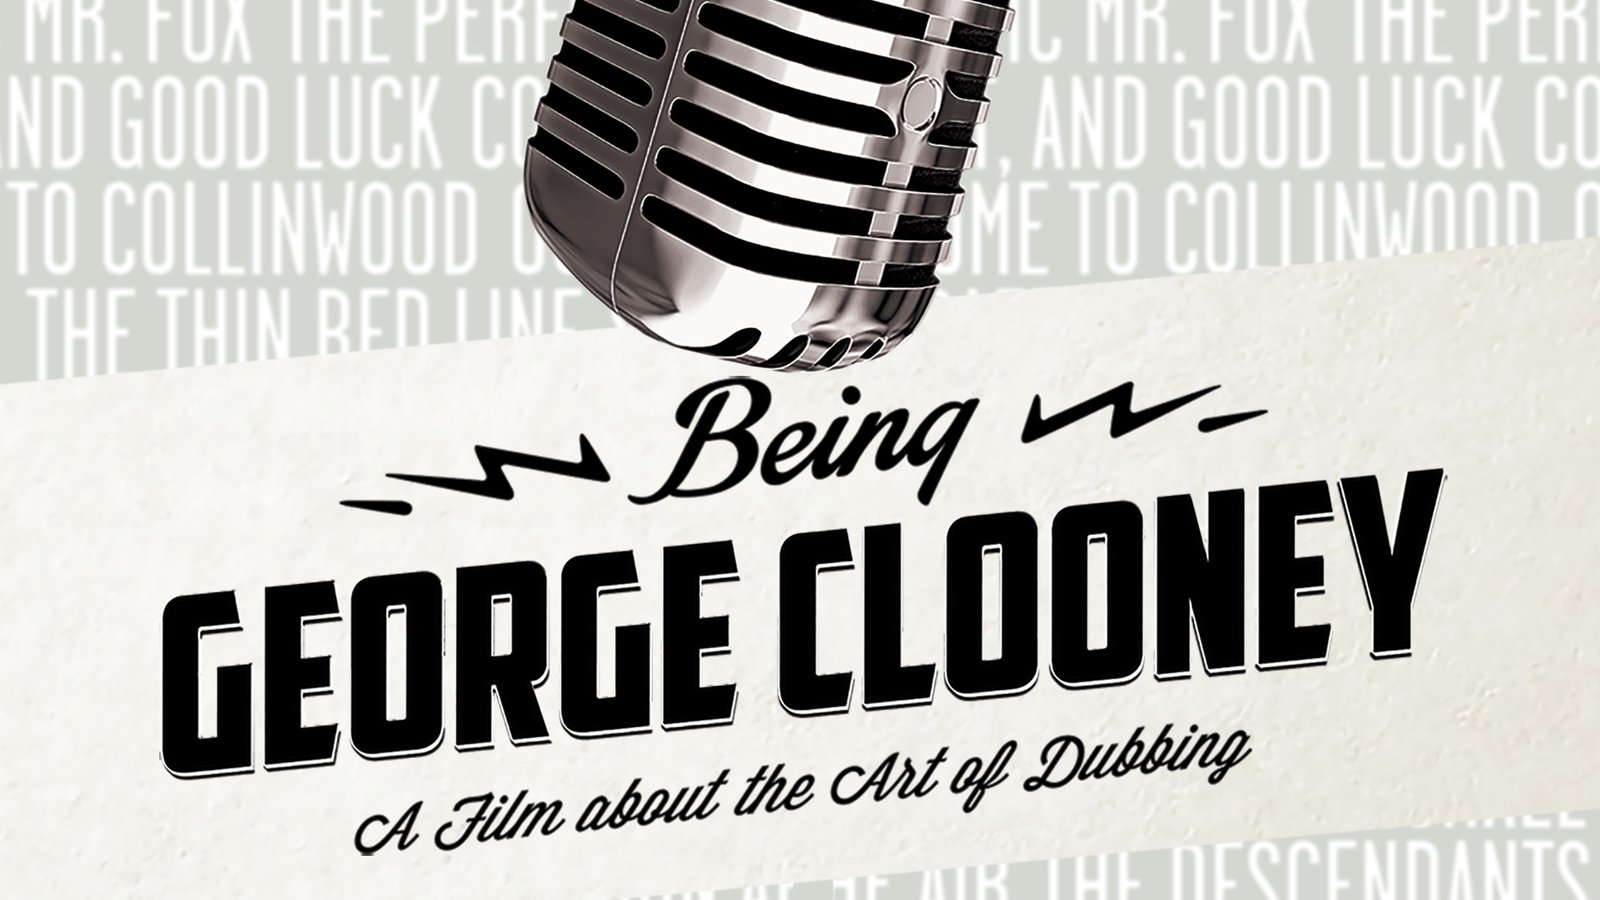 Being George Clooney - The Art of Audio Dubbing